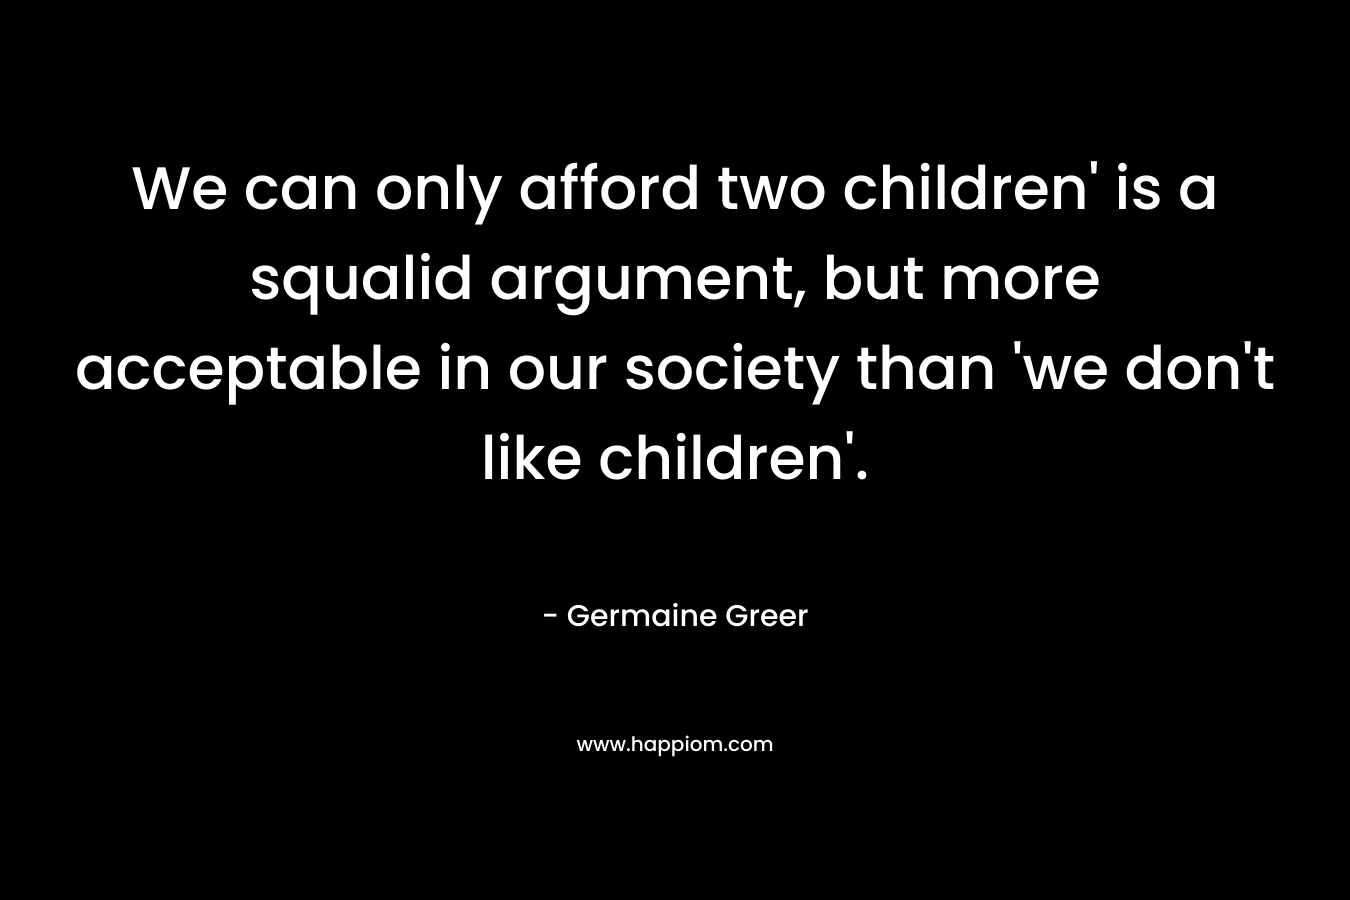 We can only afford two children’ is a squalid argument, but more acceptable in our society than ‘we don’t like children’. – Germaine Greer